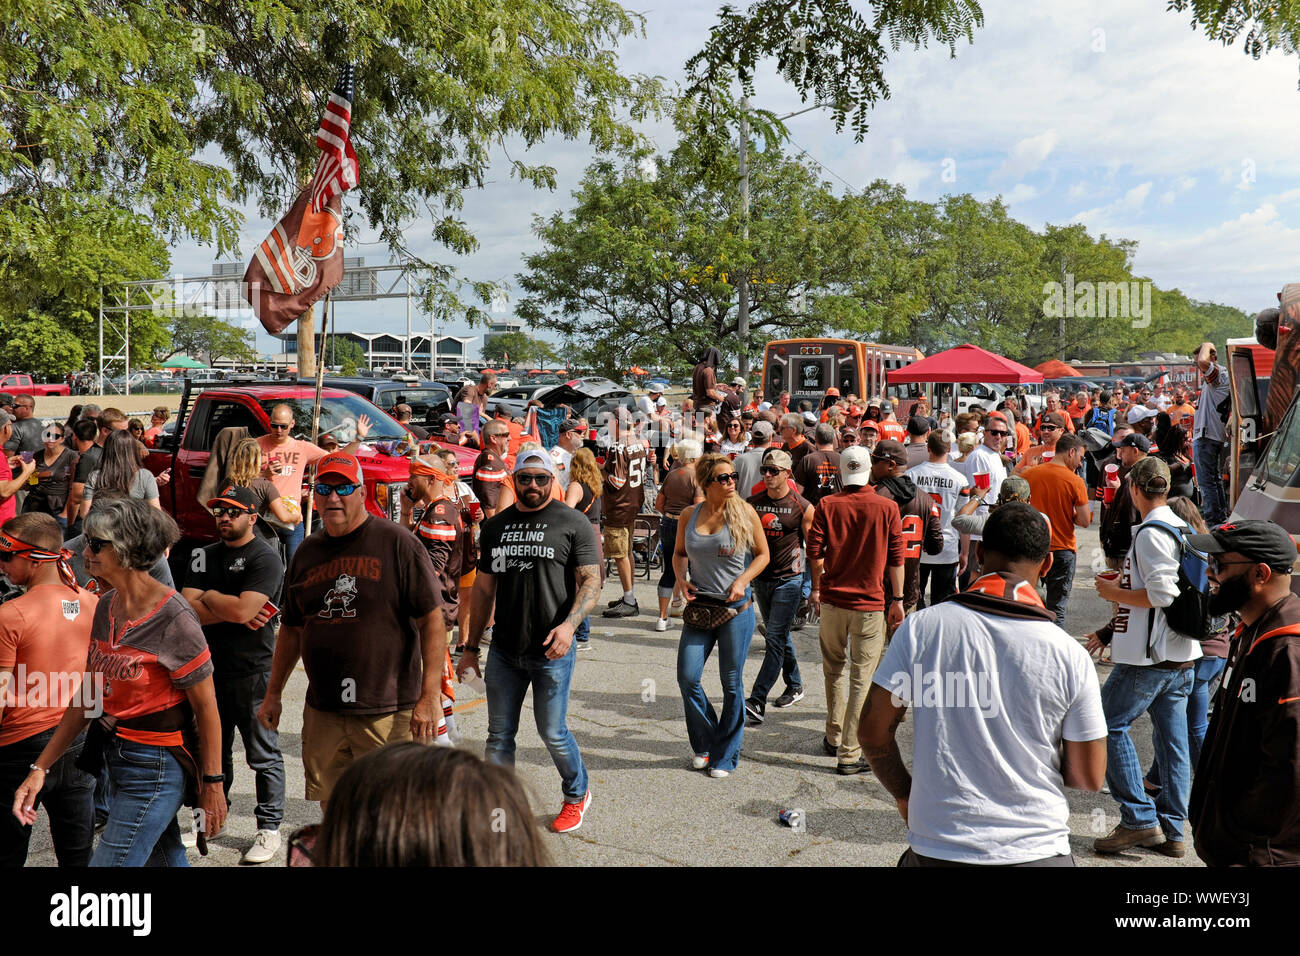 Cleveland Browns football fans fill the Municipal (Muni) Lot for tailgating in Cleveland, Ohio, USA prior to their 2019 home opening game. Stock Photo